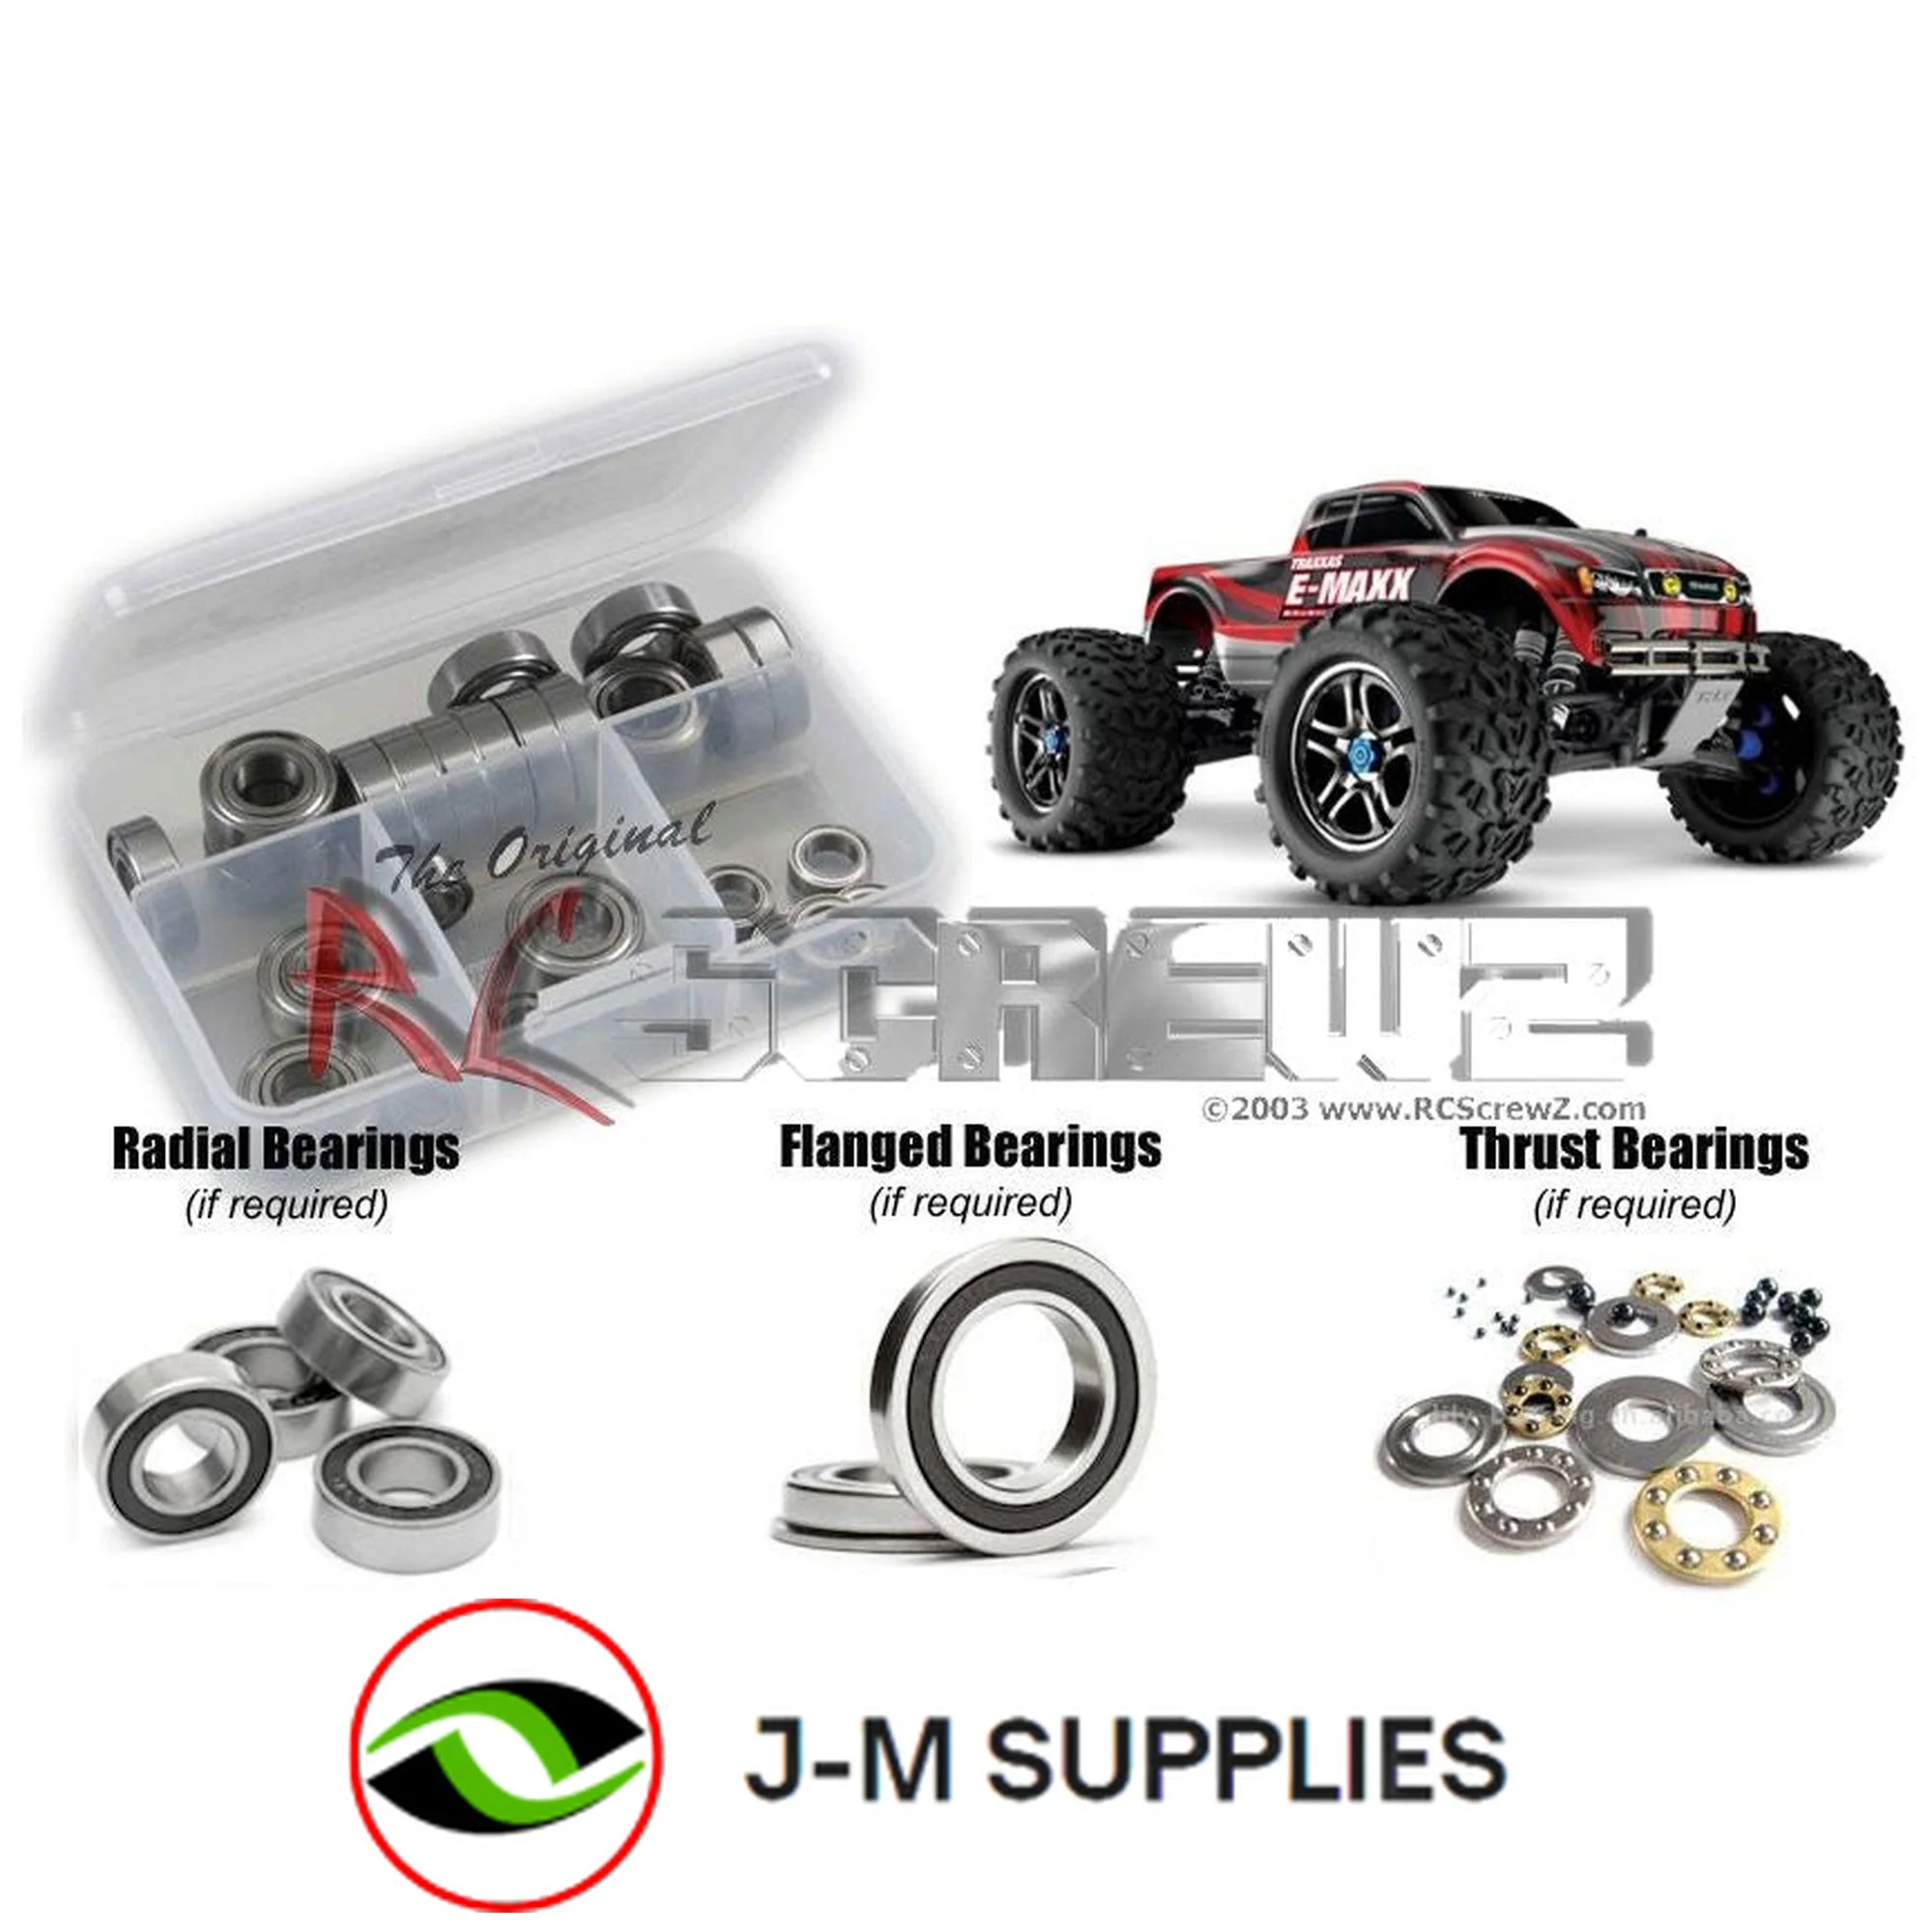 RCScrewZ Rubber Shielded Bearing Kit tra062r for Traxxas E-Maxx TSM Ed. #39087-3 - Picture 1 of 12